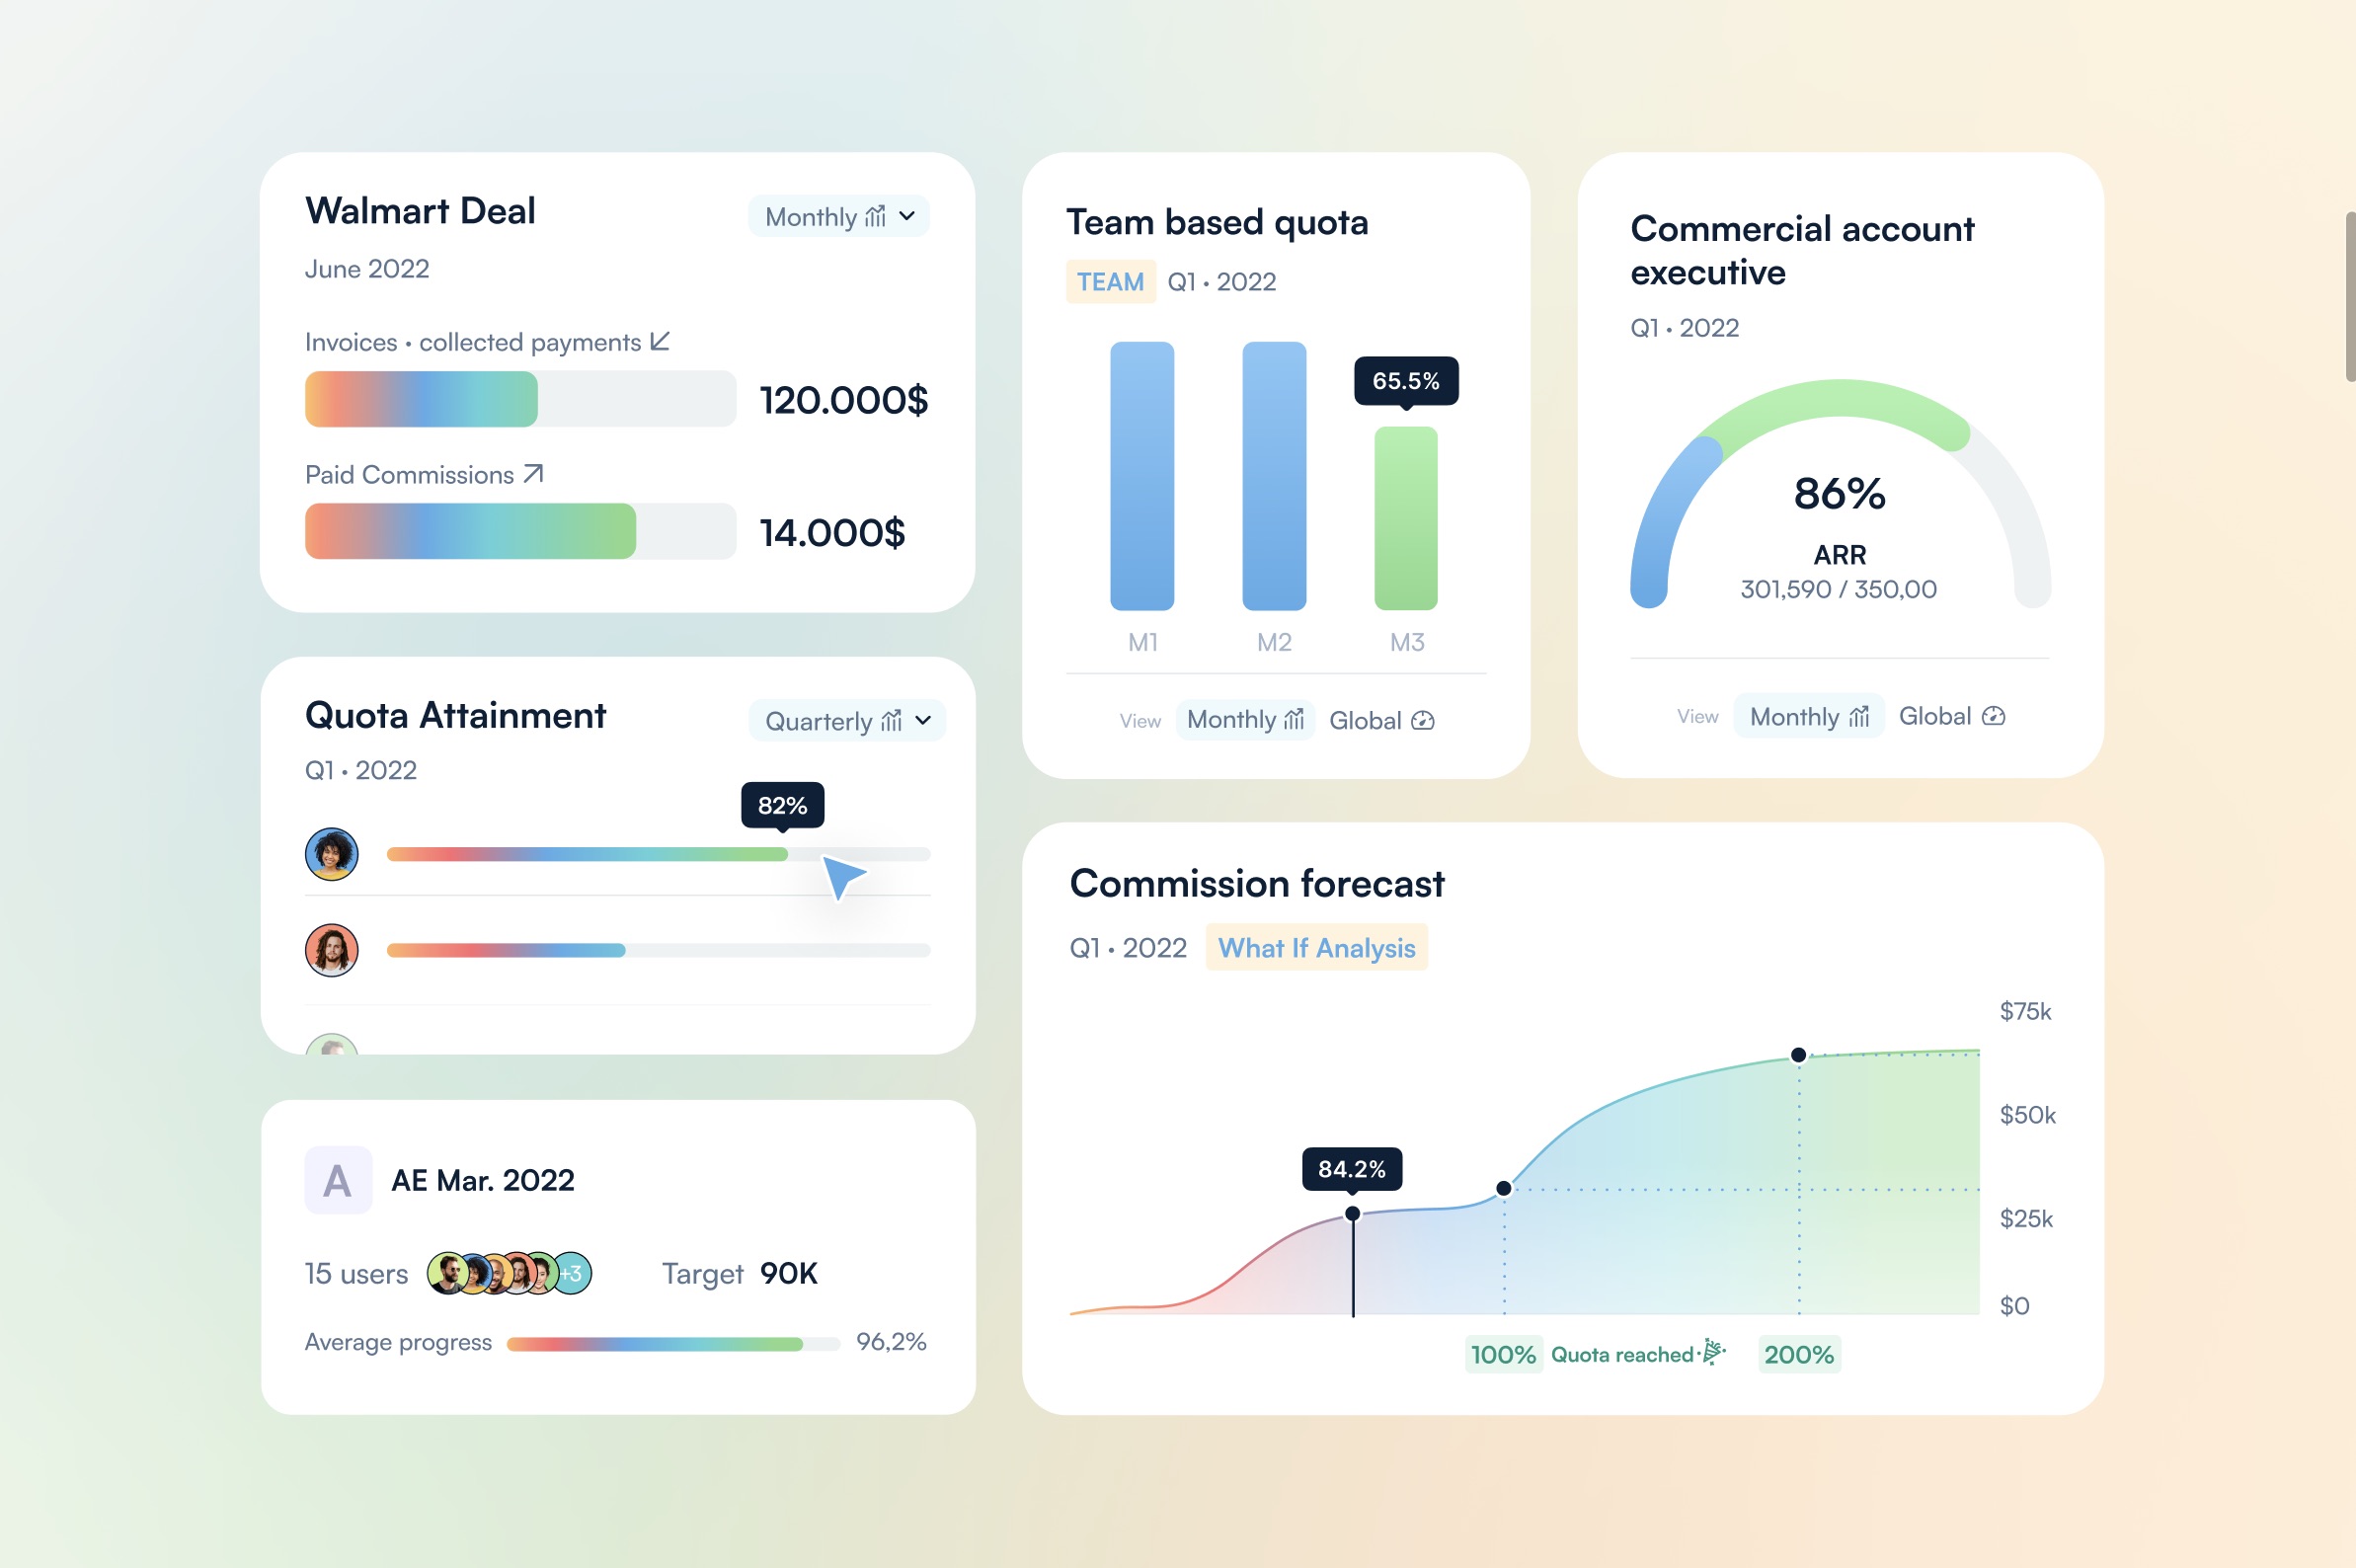 Palette sells a sales commission tool for modern sales teams